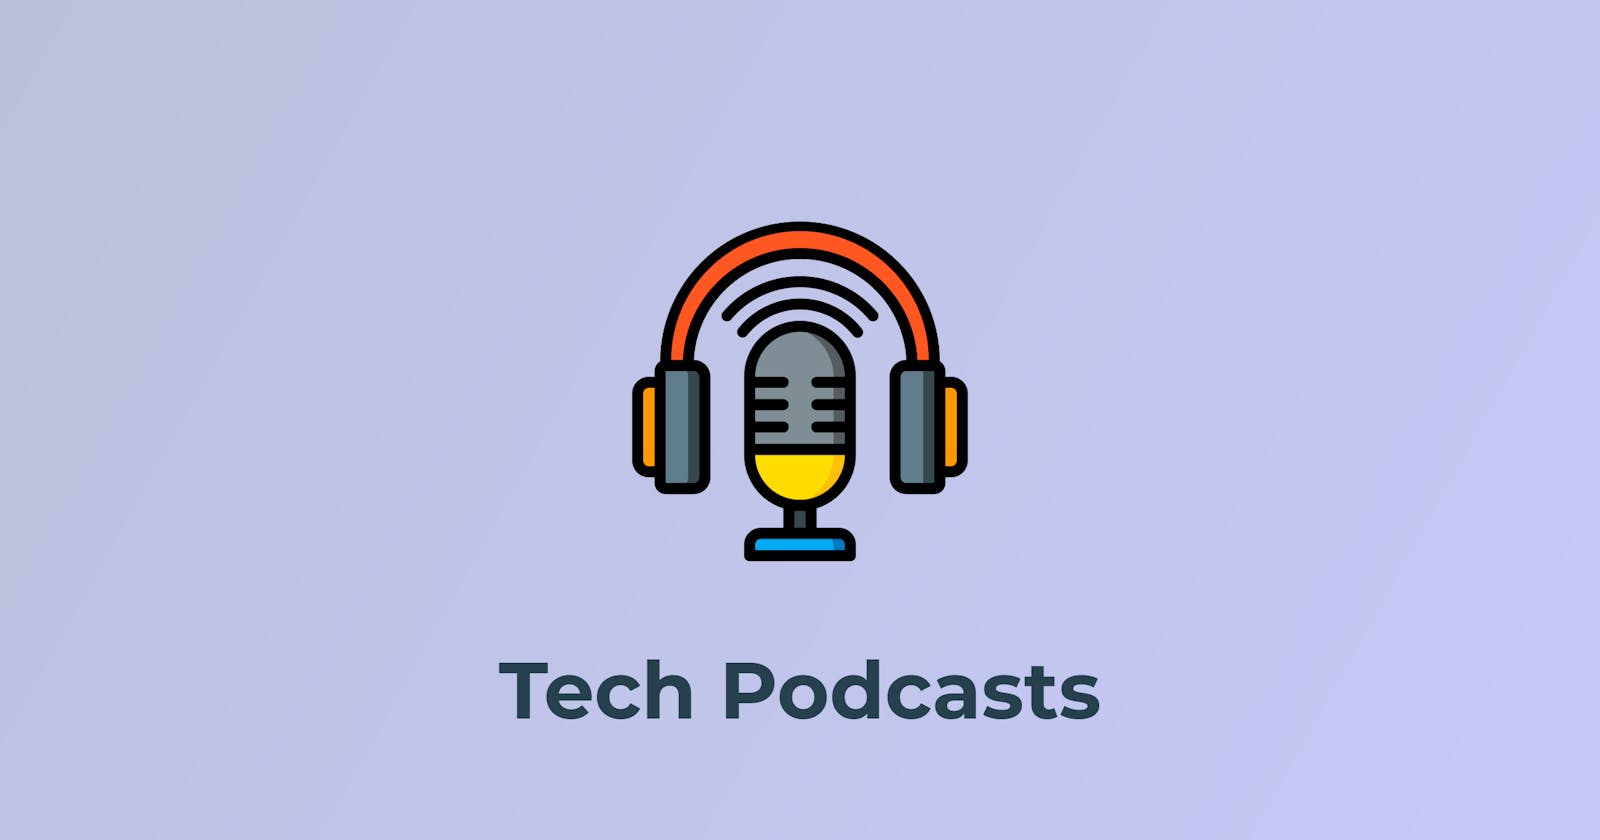 5 best tech podcasts for developers in 2023